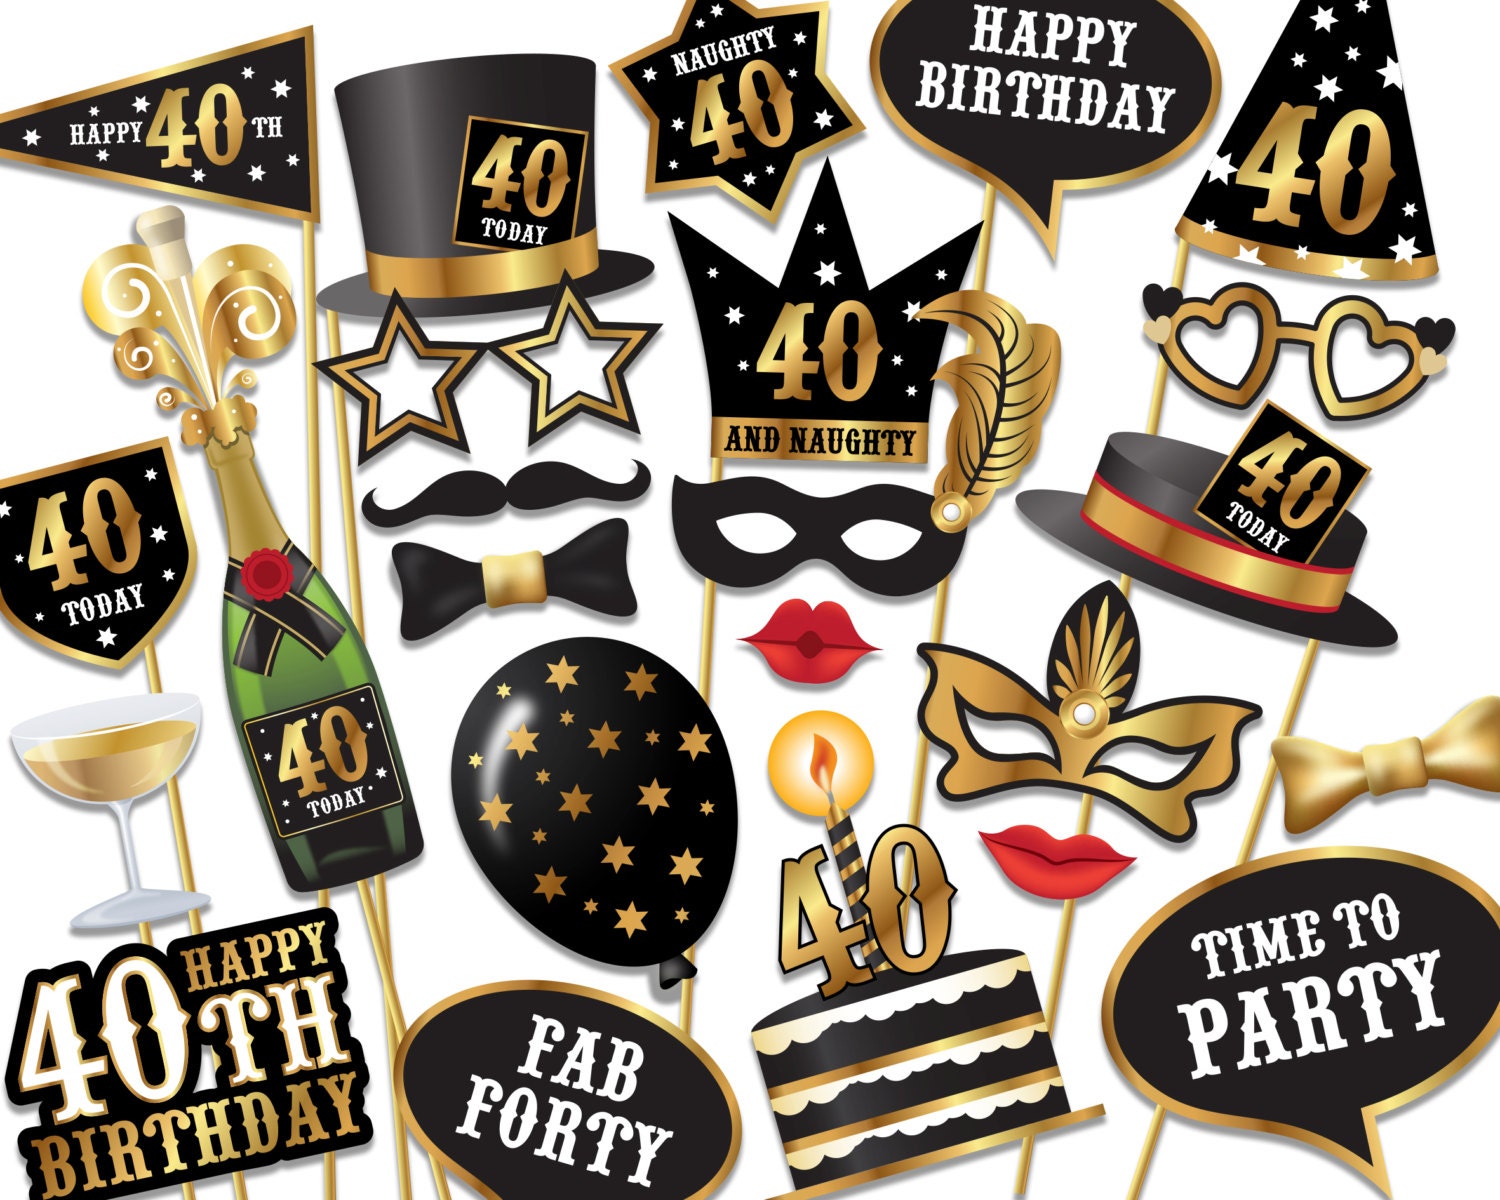 40th-birthday-photo-booth-props-printablepdf-black-and-gold-etsy